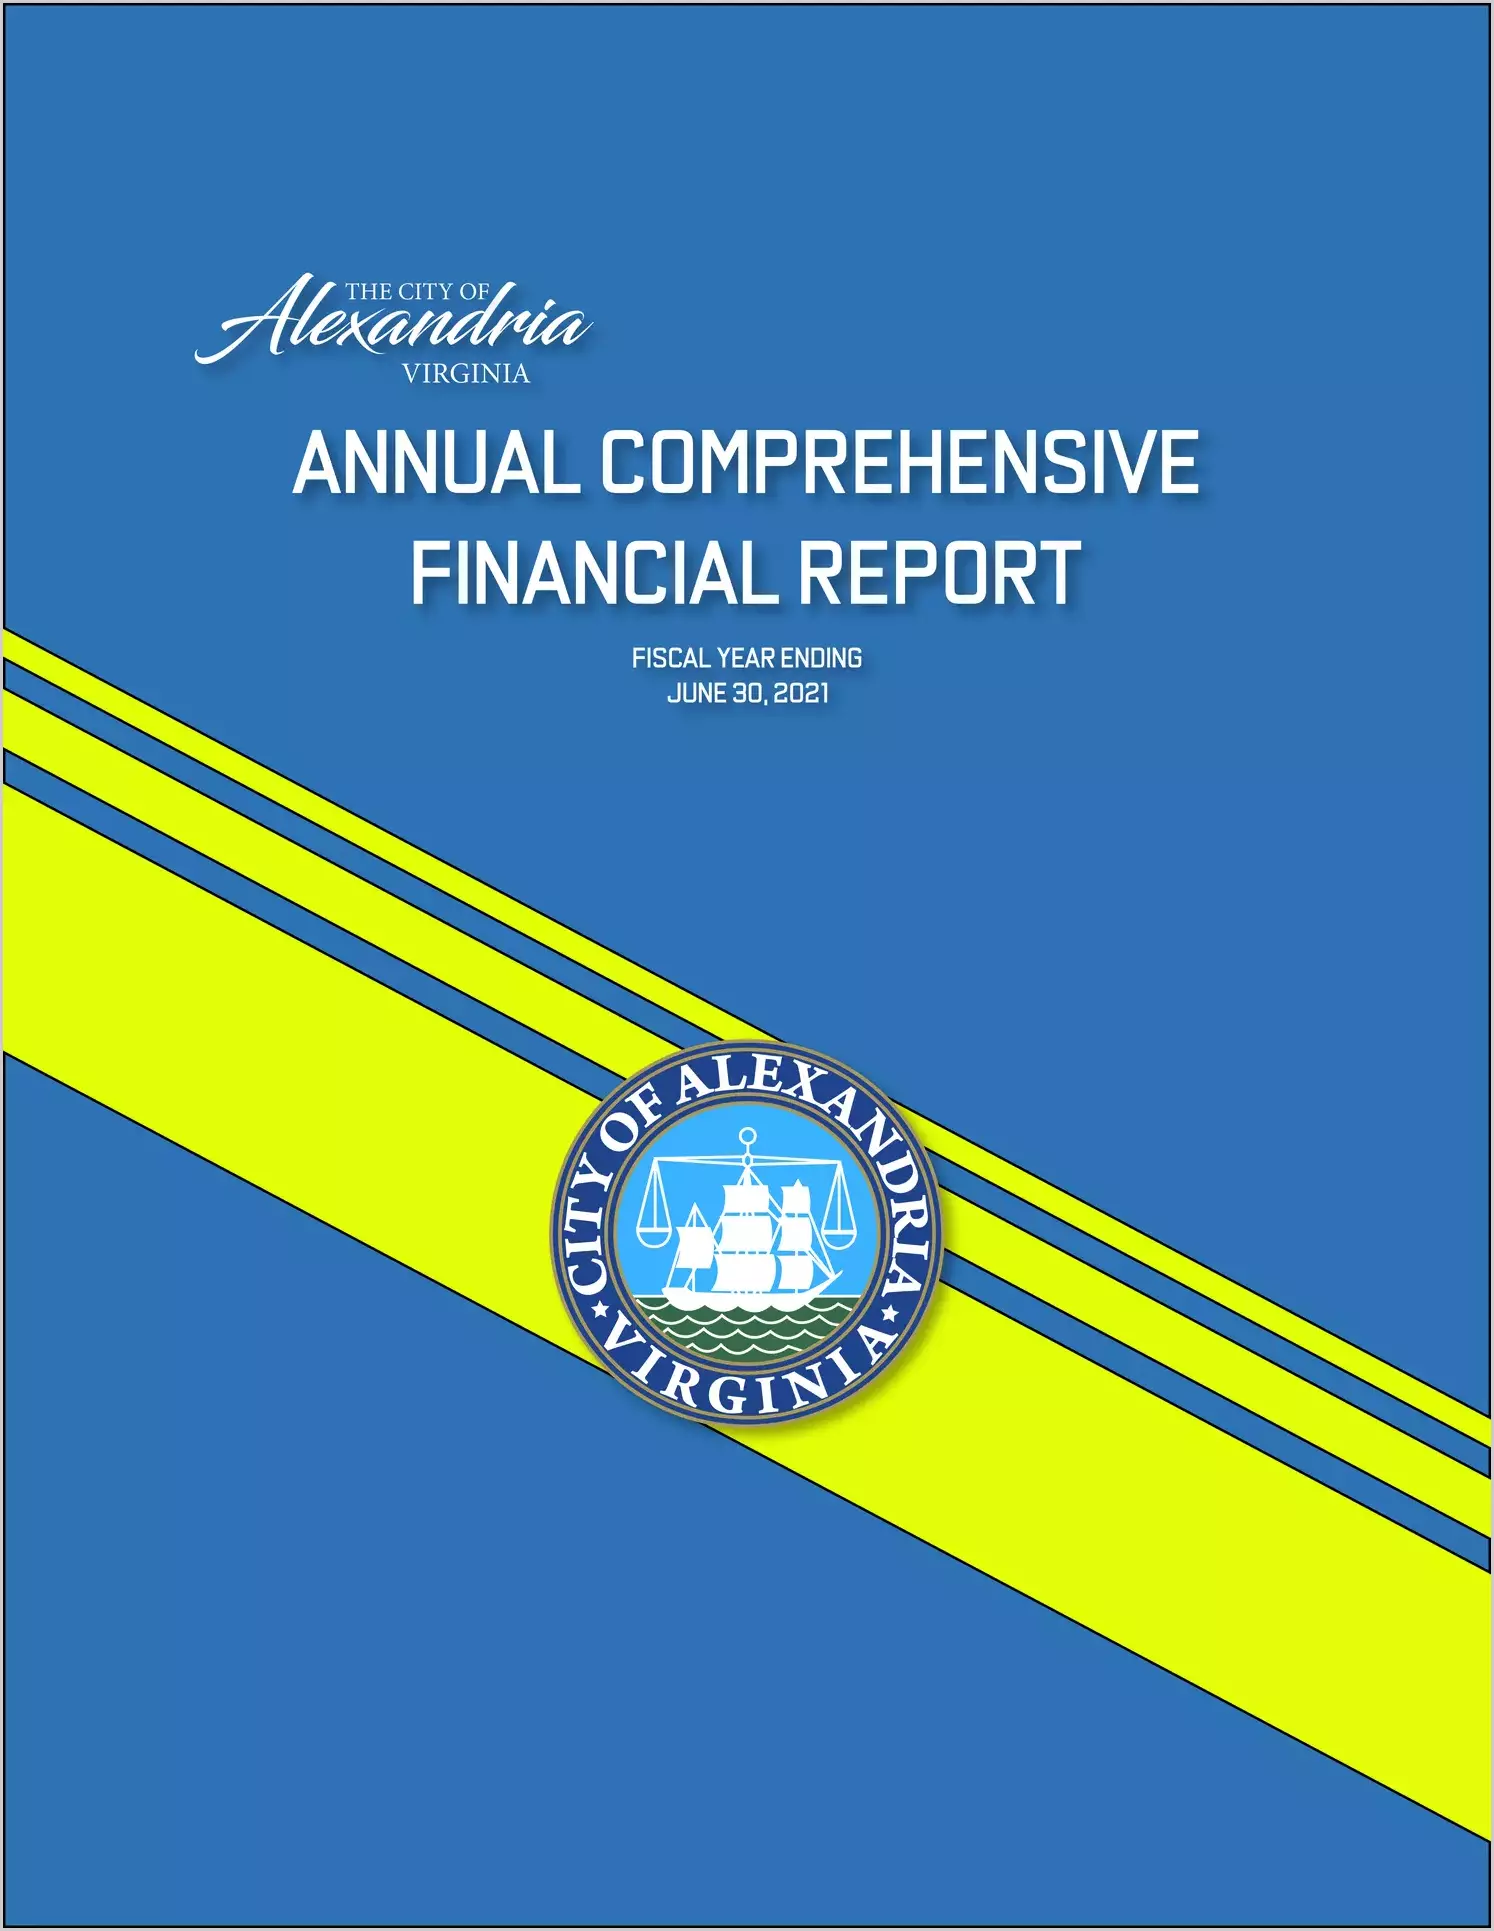 2021 Annual Financial Report for City of Alexandria